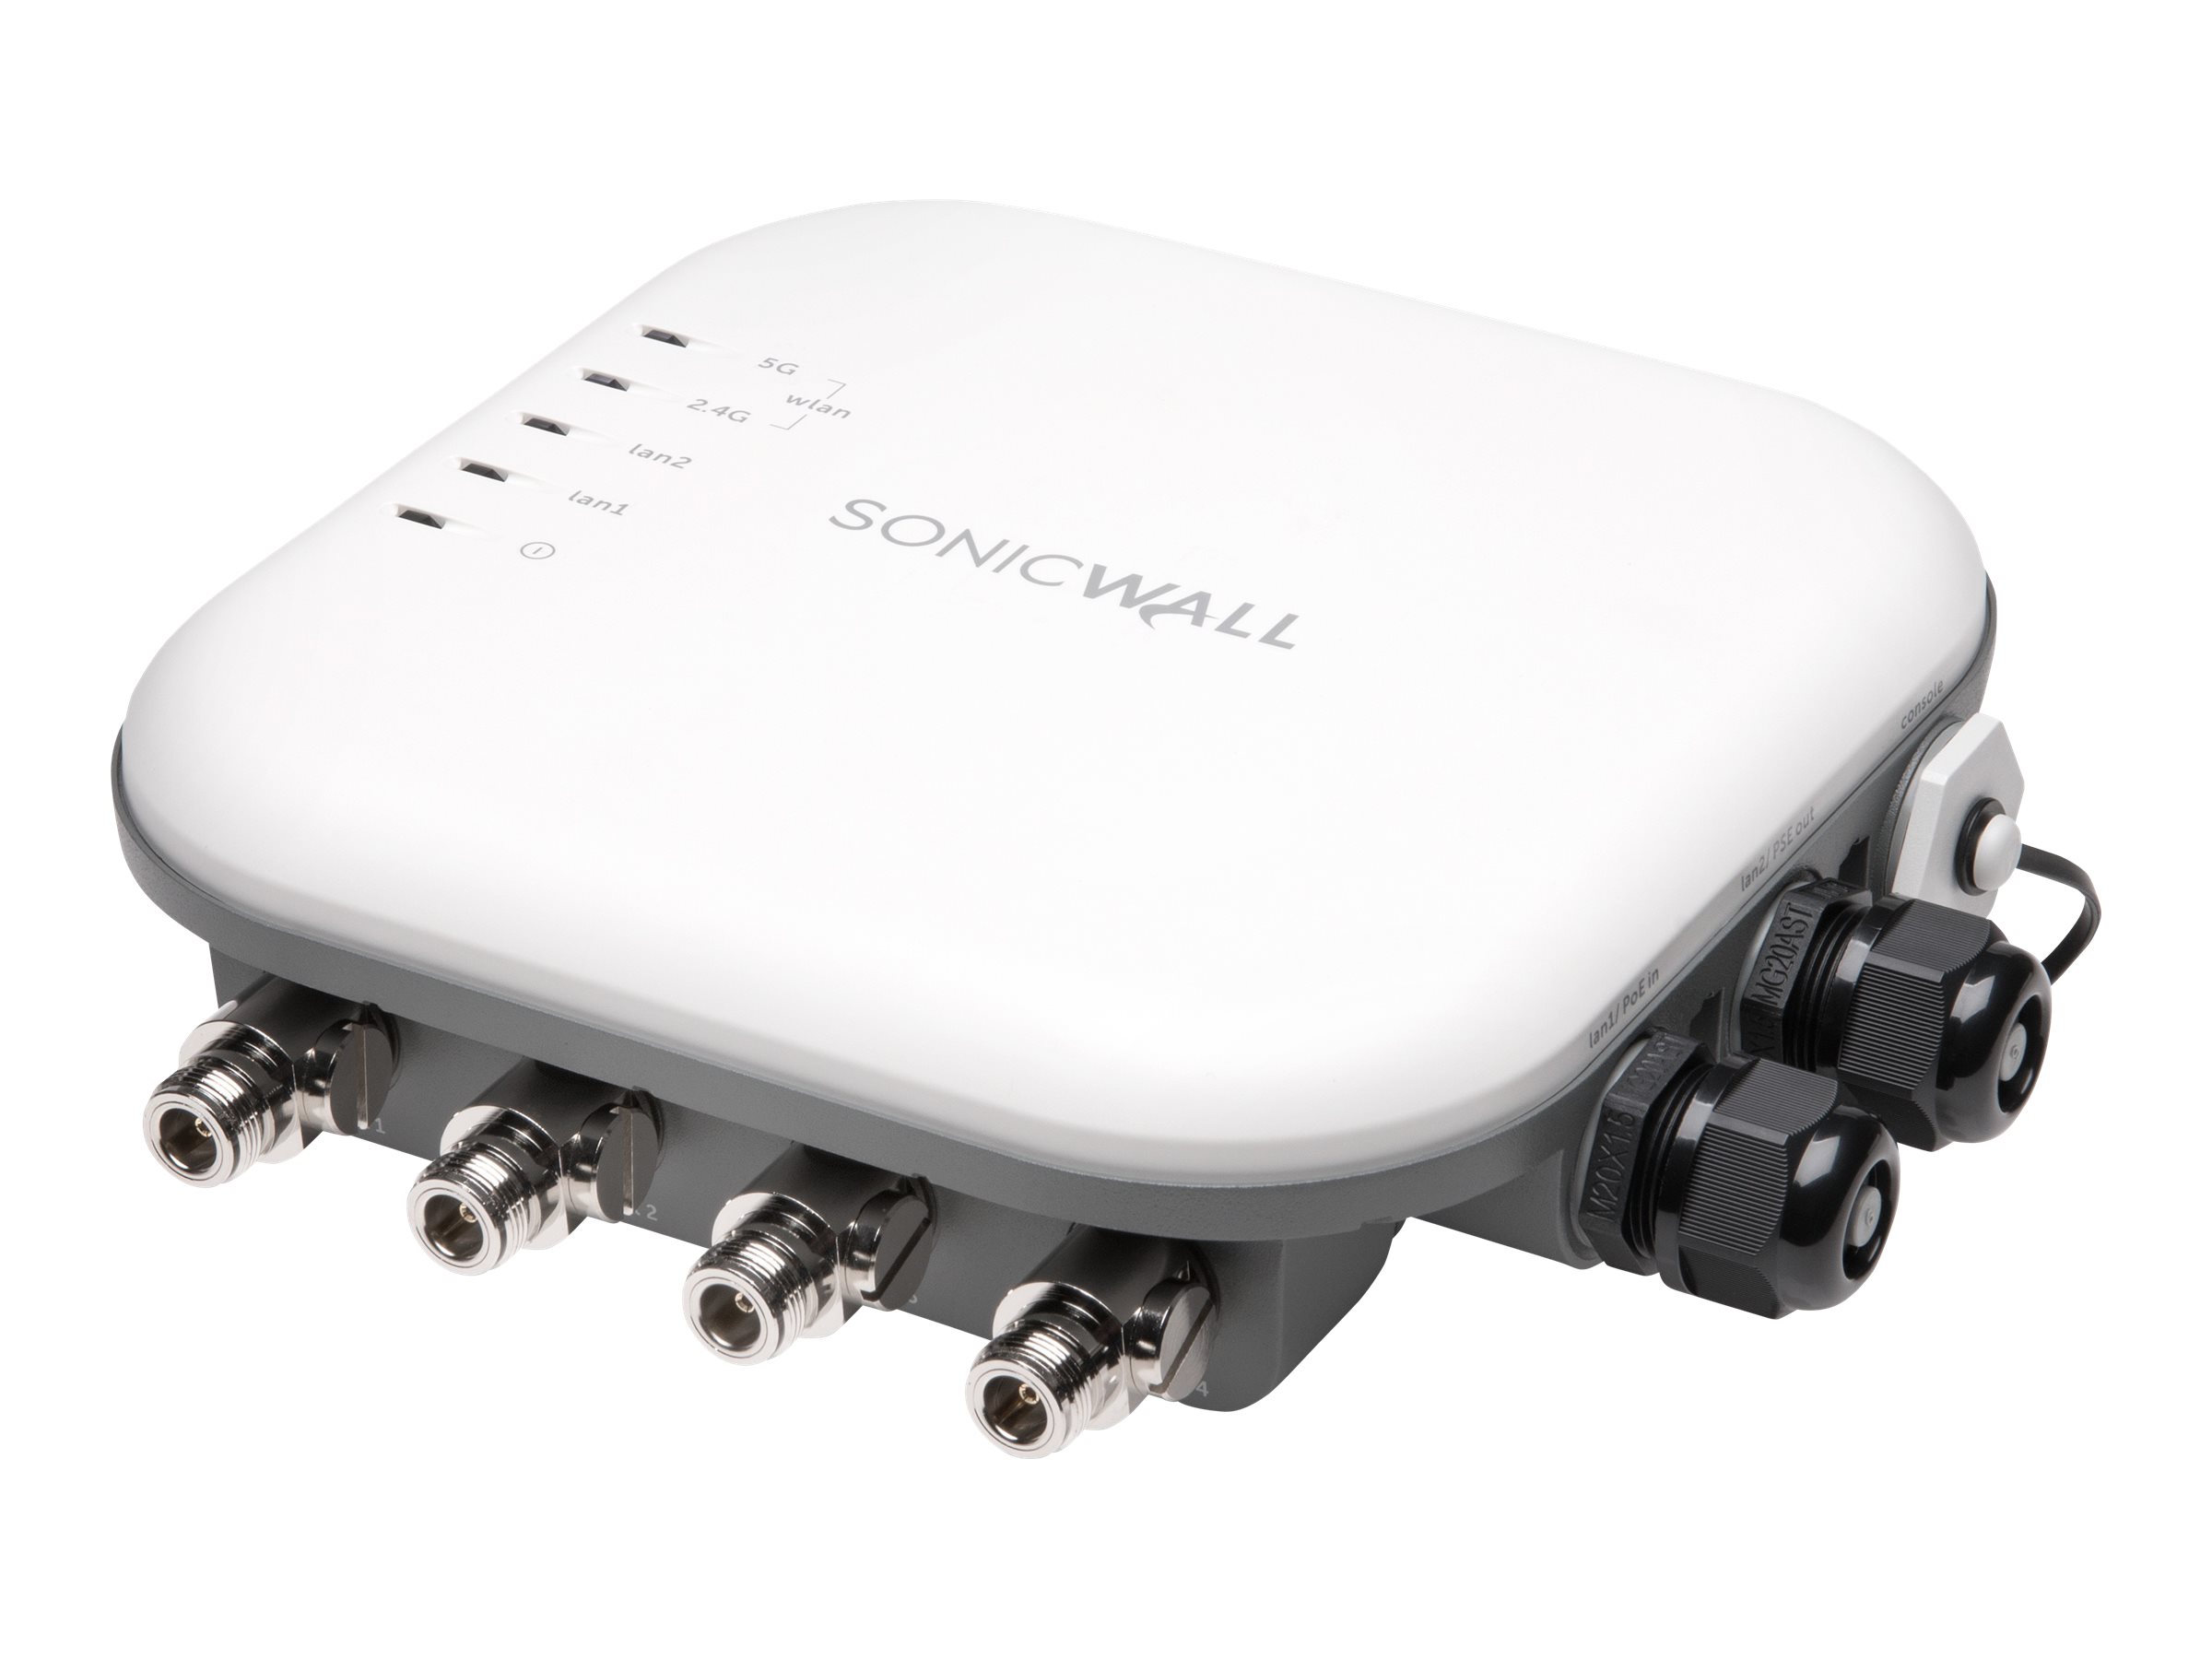 SonicWall SonicWave 432o - Accesspoint - mit 1 Jahr Advanced Secure Cloud WiFi Management und Support - Wi-Fi 5 - 2.4 GHz, 5 GHz